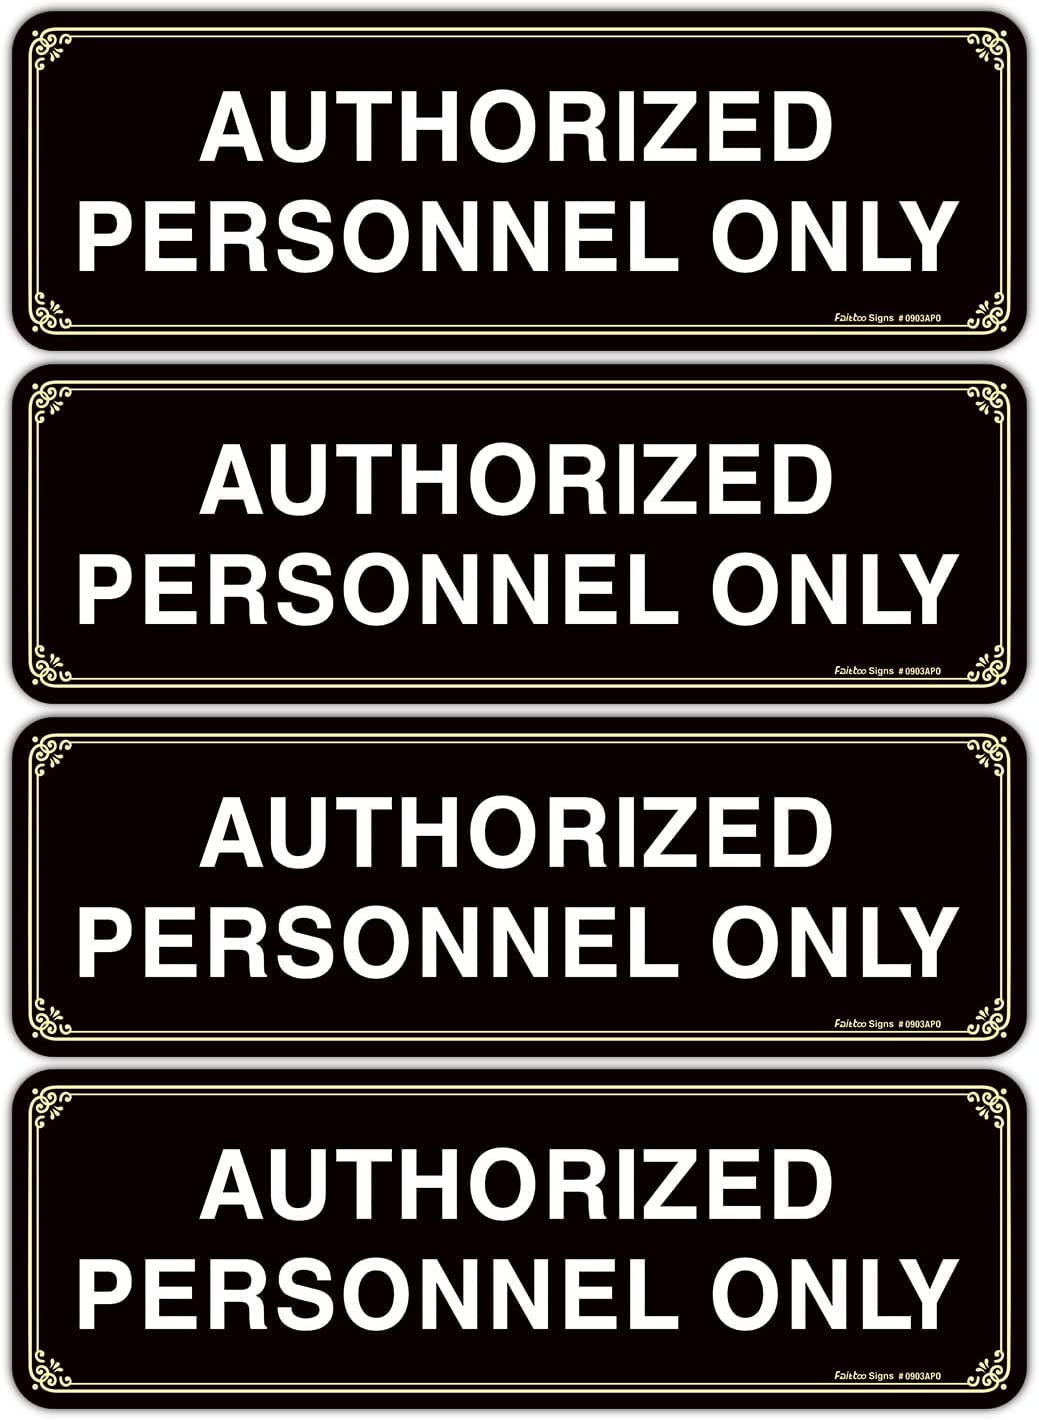 Restricted Area Sign Authorized Personnel Only, Do Not Enter Sign, 10 x 7 Inches .40 Rust Free Aluminum, UV Protected, Waterproof, Weather Resistant, Durable Ink, Easy to Mount